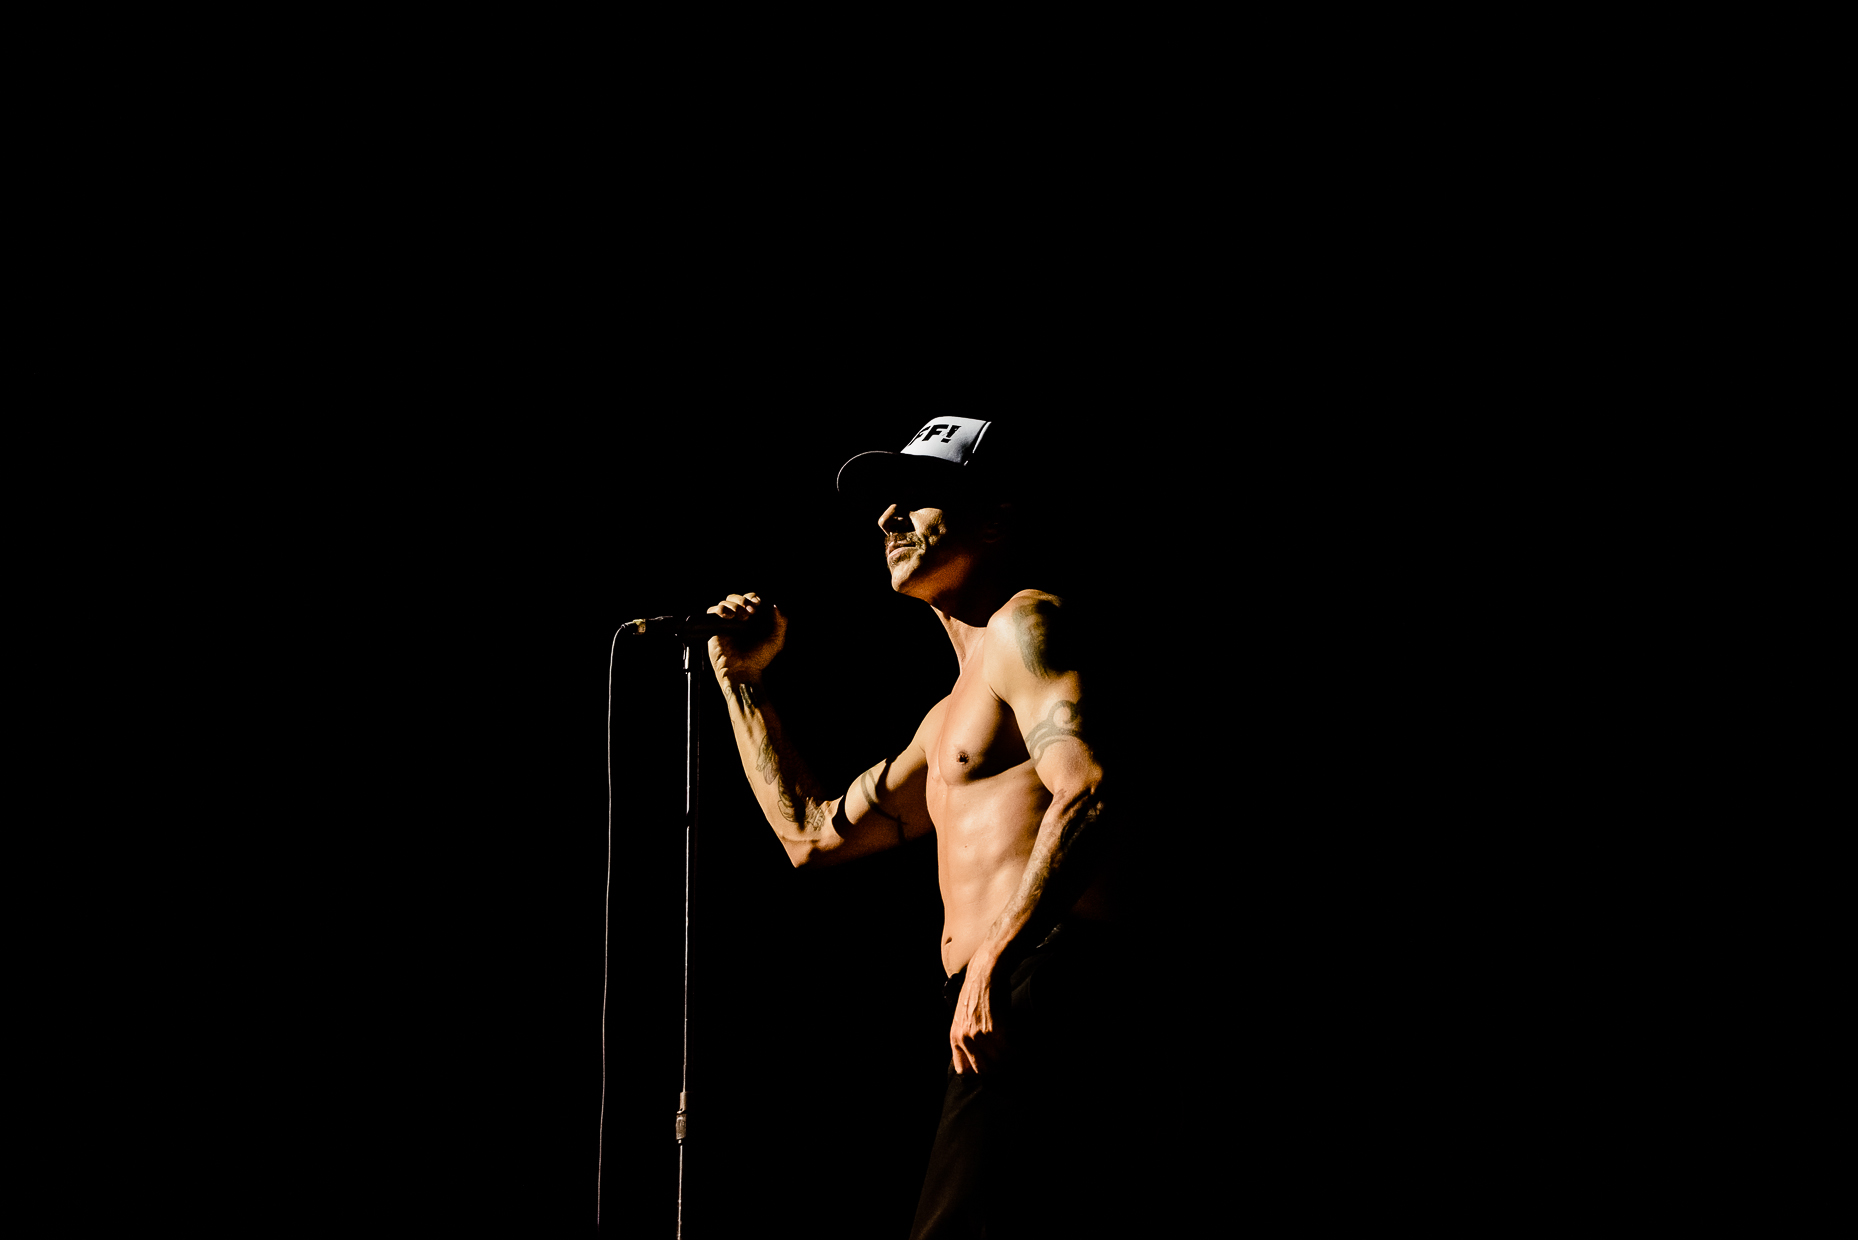 Red-Hot-Chili-Peppers-Austin-Music-Commercial-Photographer-Anthony-kiedis.jpg